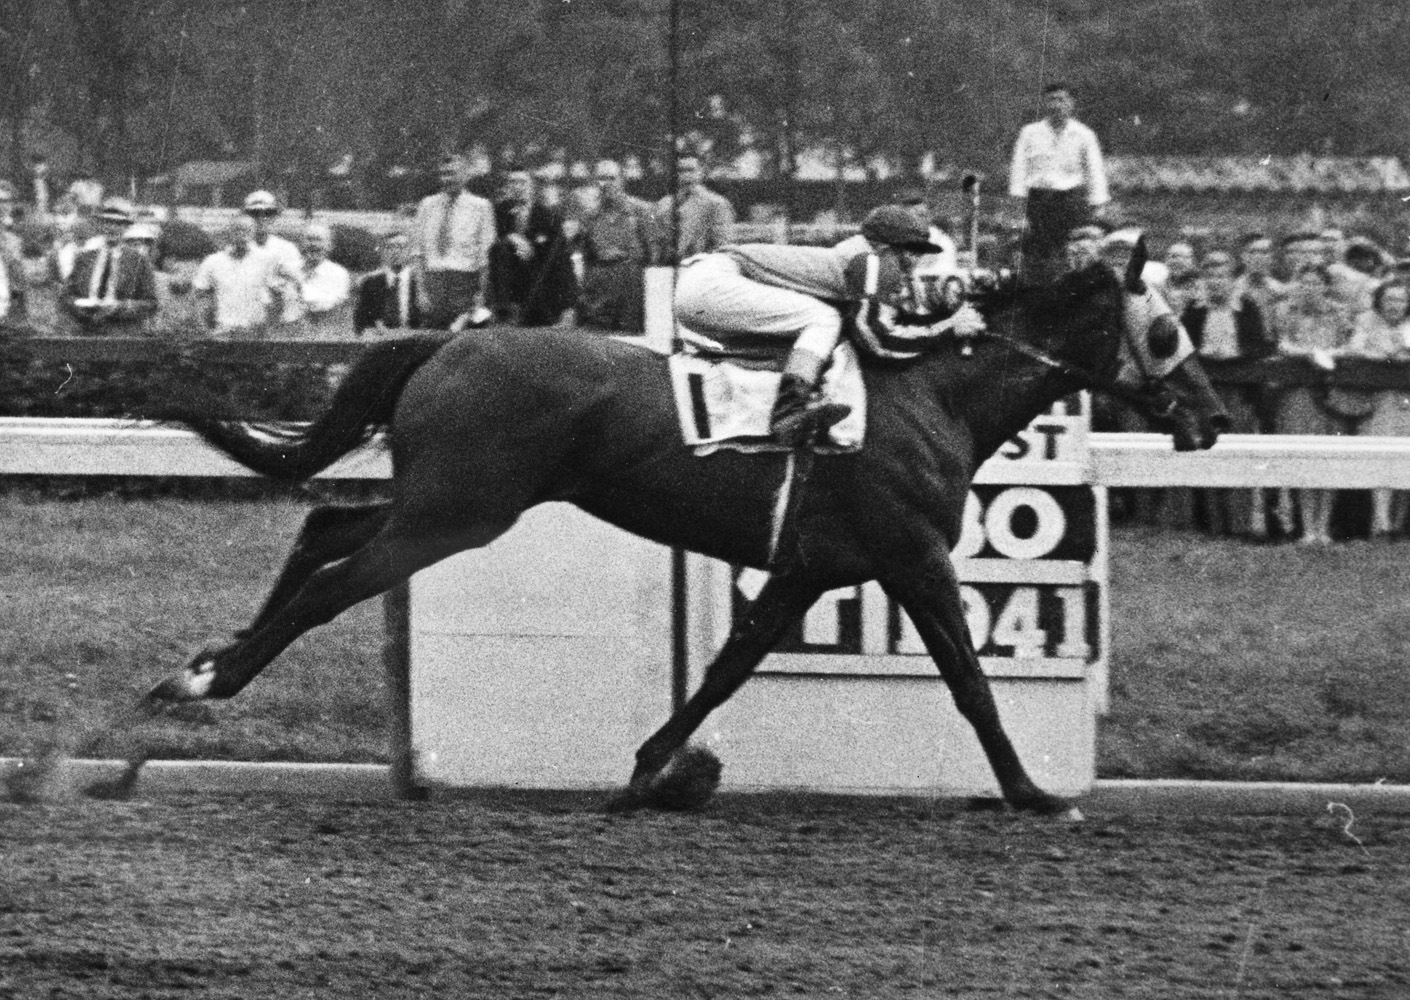 Devil Diver (Jack Skelly up) wins the 1941 Hopeful at Saratoga Race Course (International News Photos/Museum Collection)